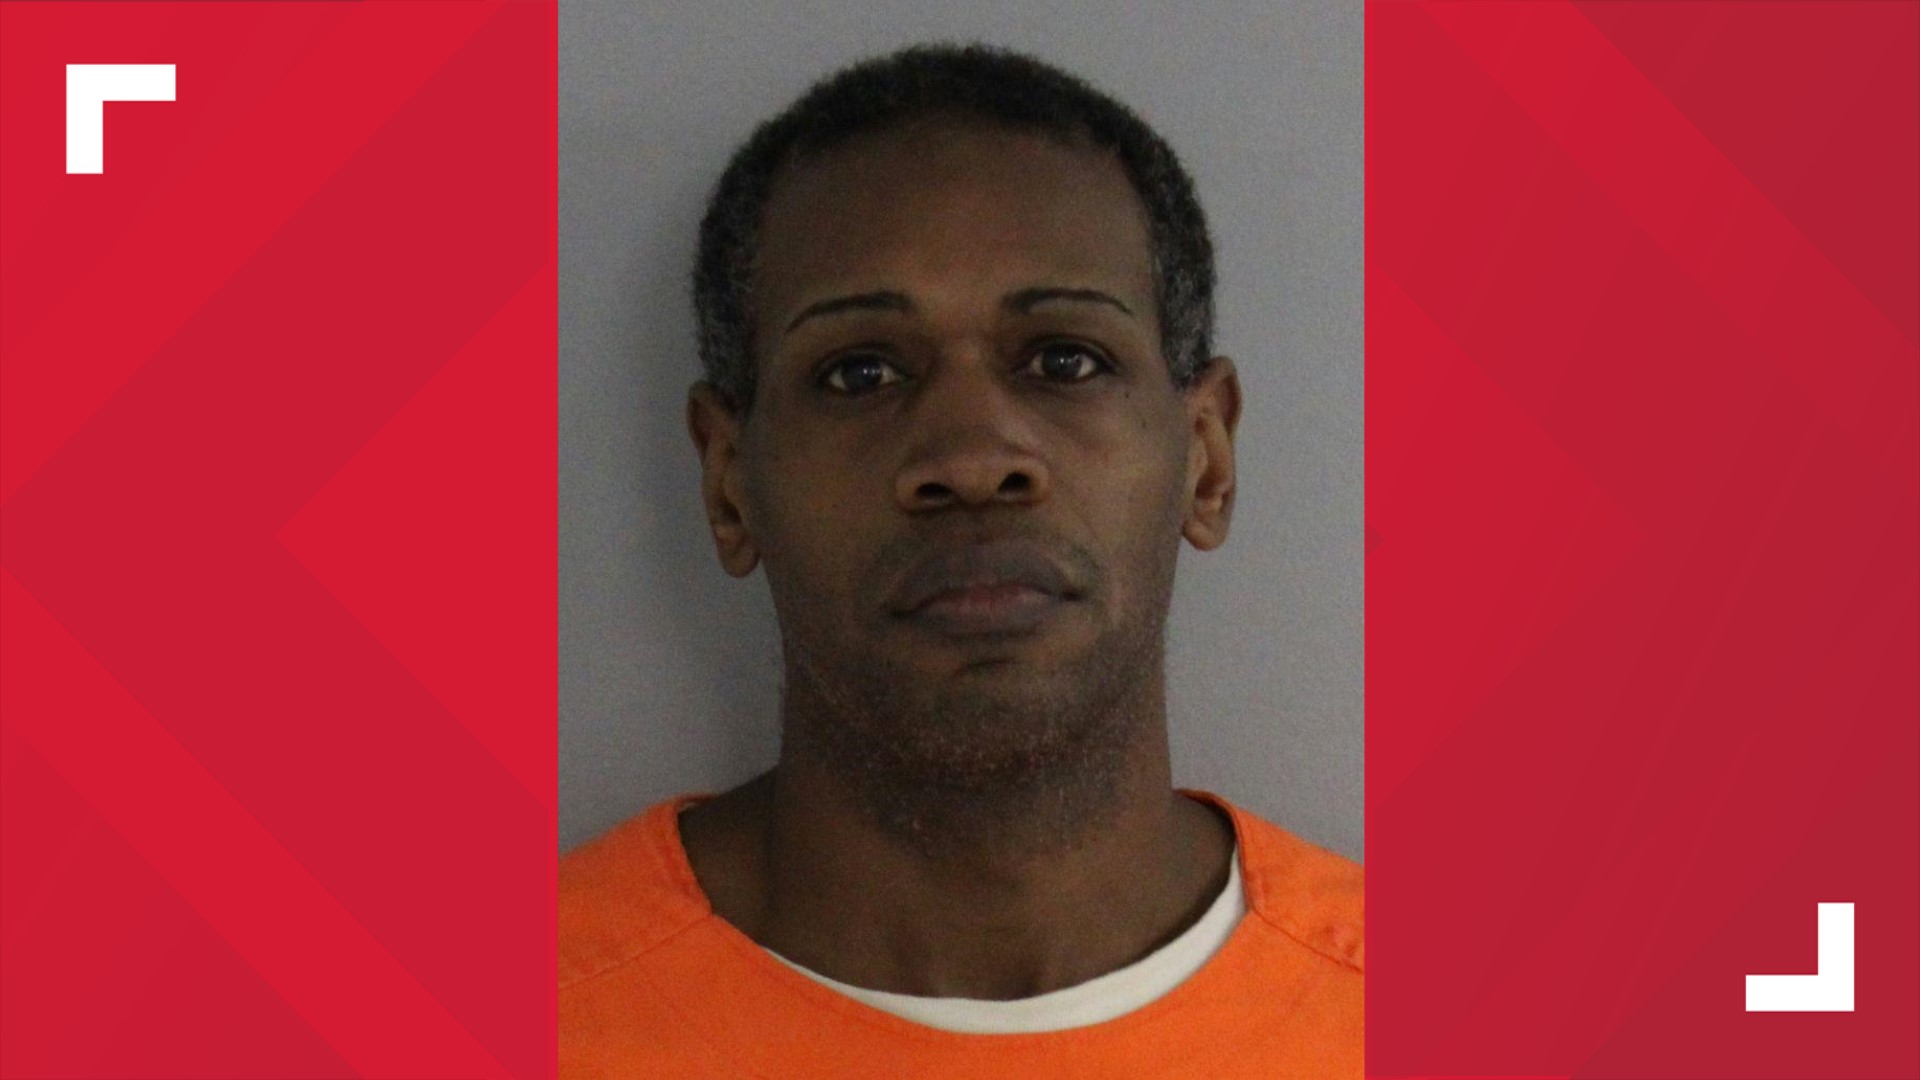 Joseph Gaines was sentenced for transporting a young girl across multiple states for the purpose of sexually assaulting her.